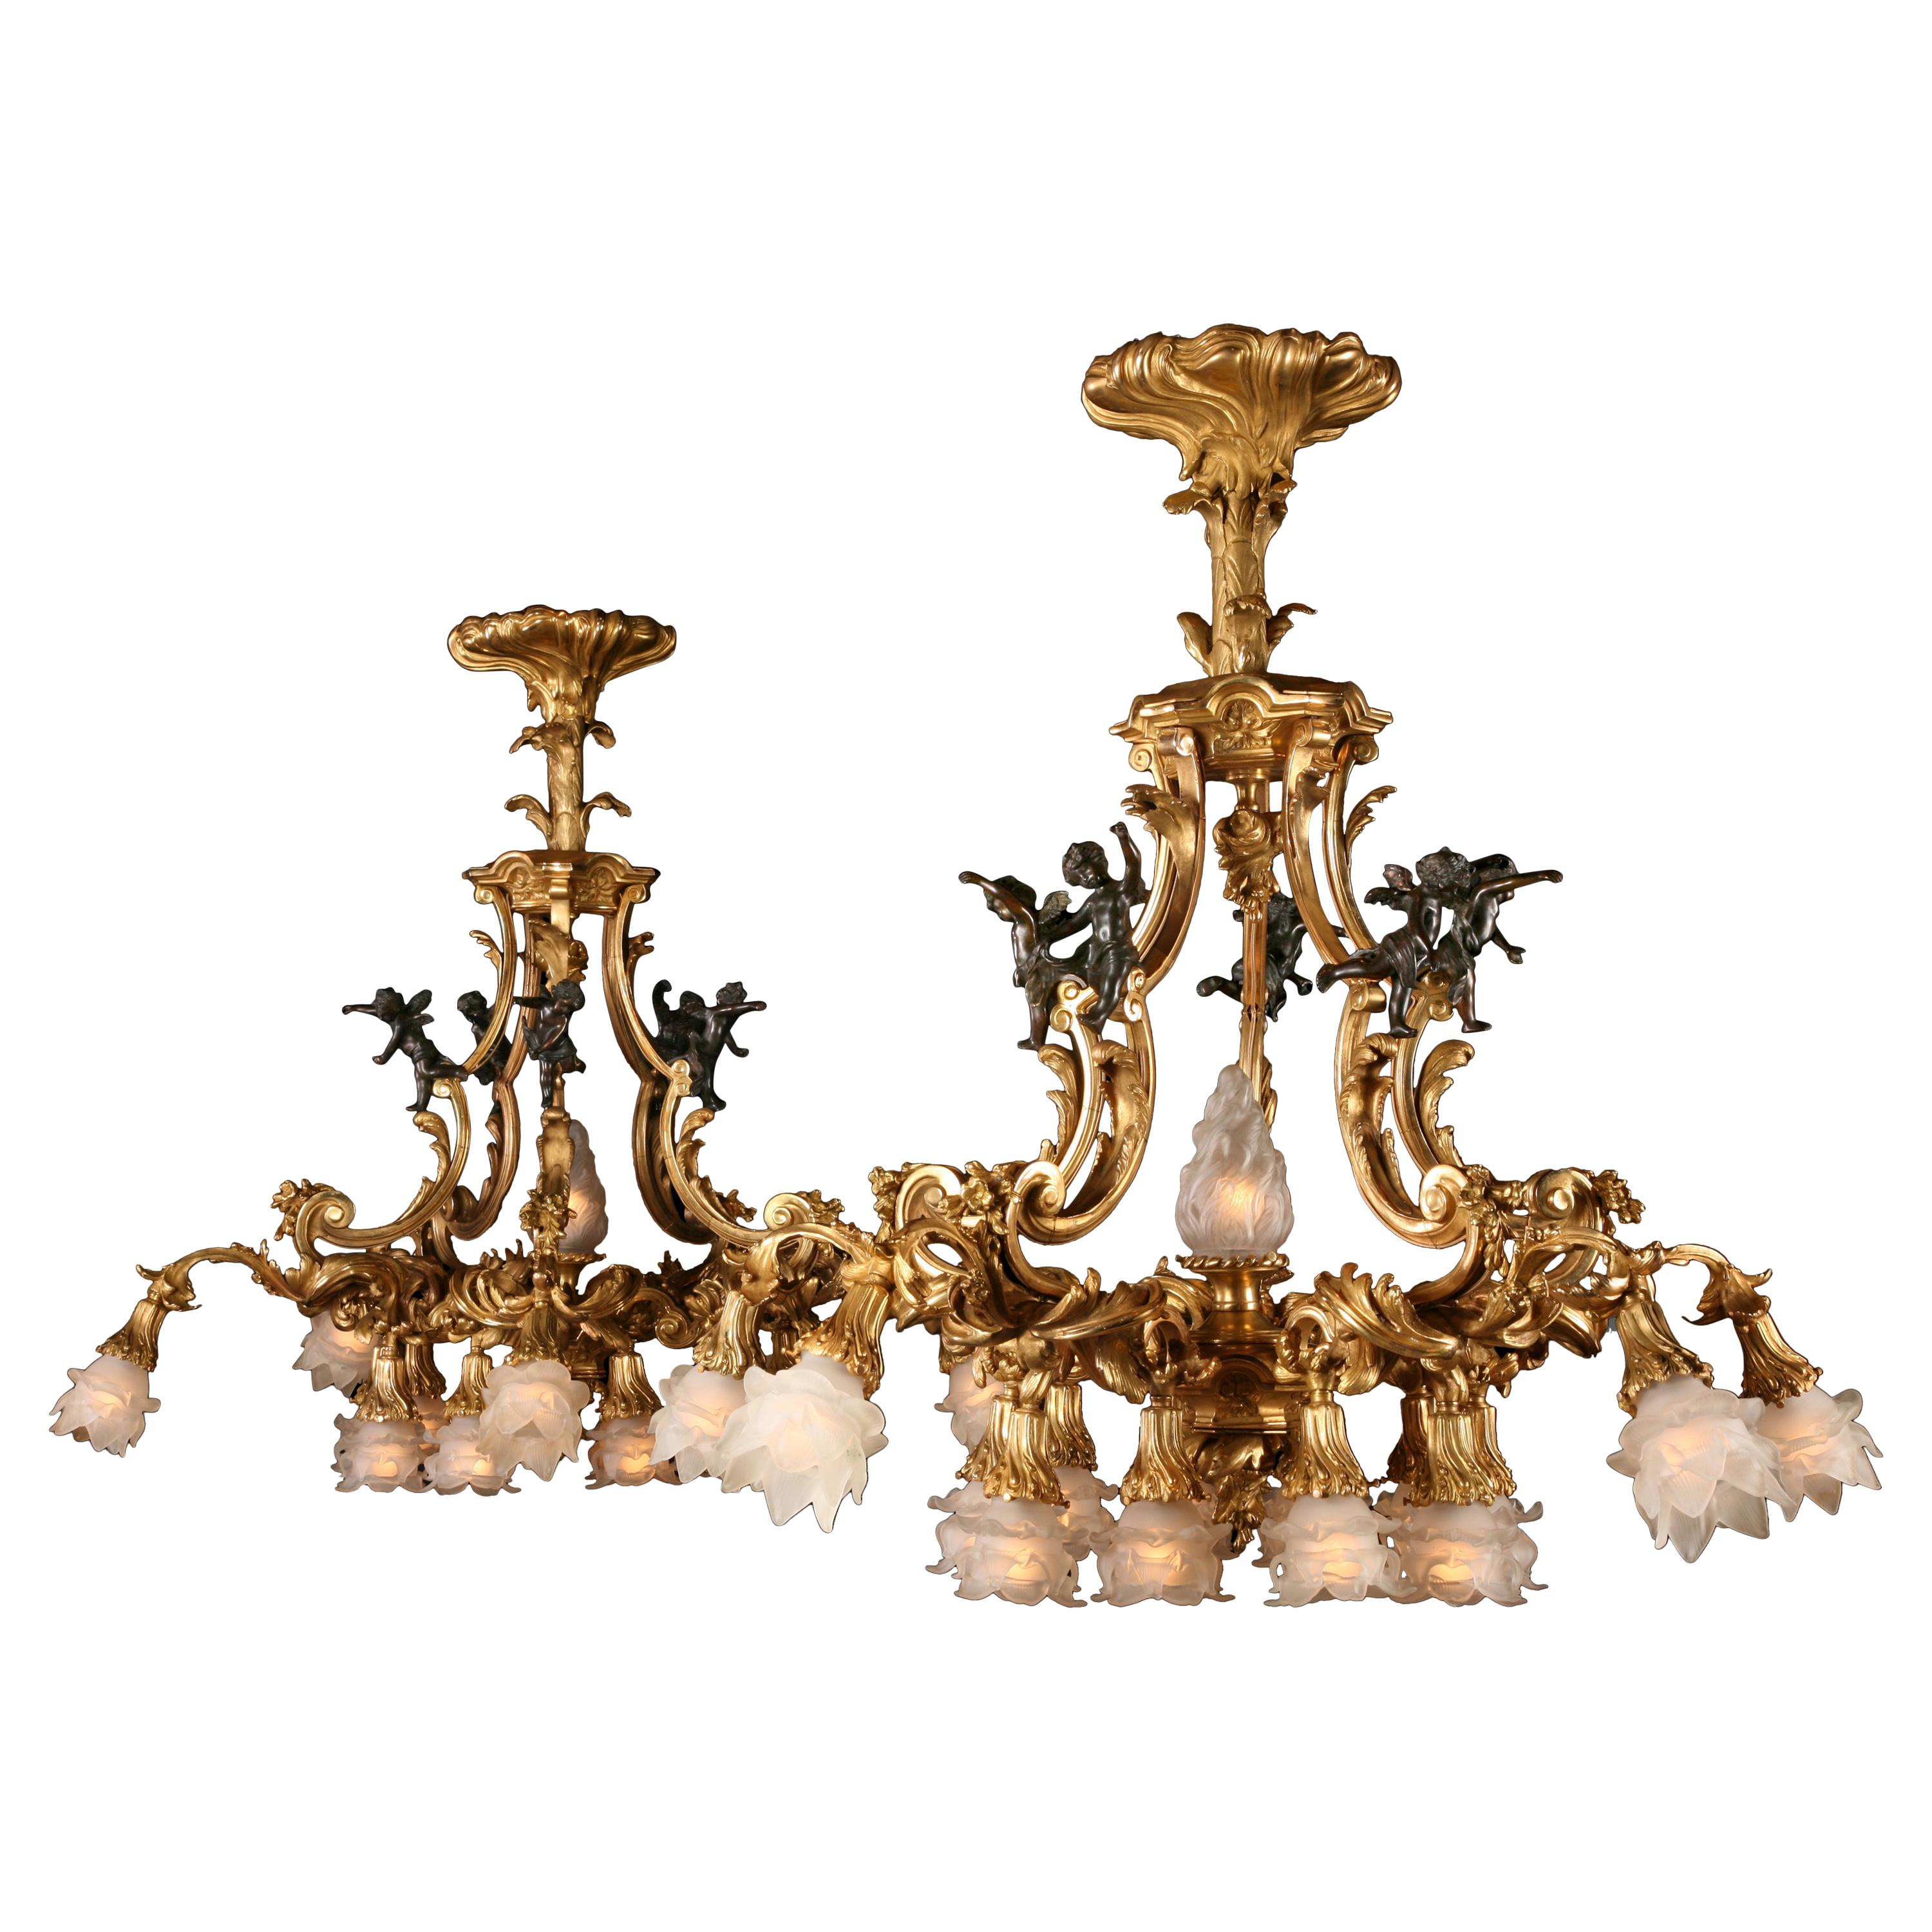 Exceptional Pair of Gilded Bronze Chandeliers Attributed to T. Millet